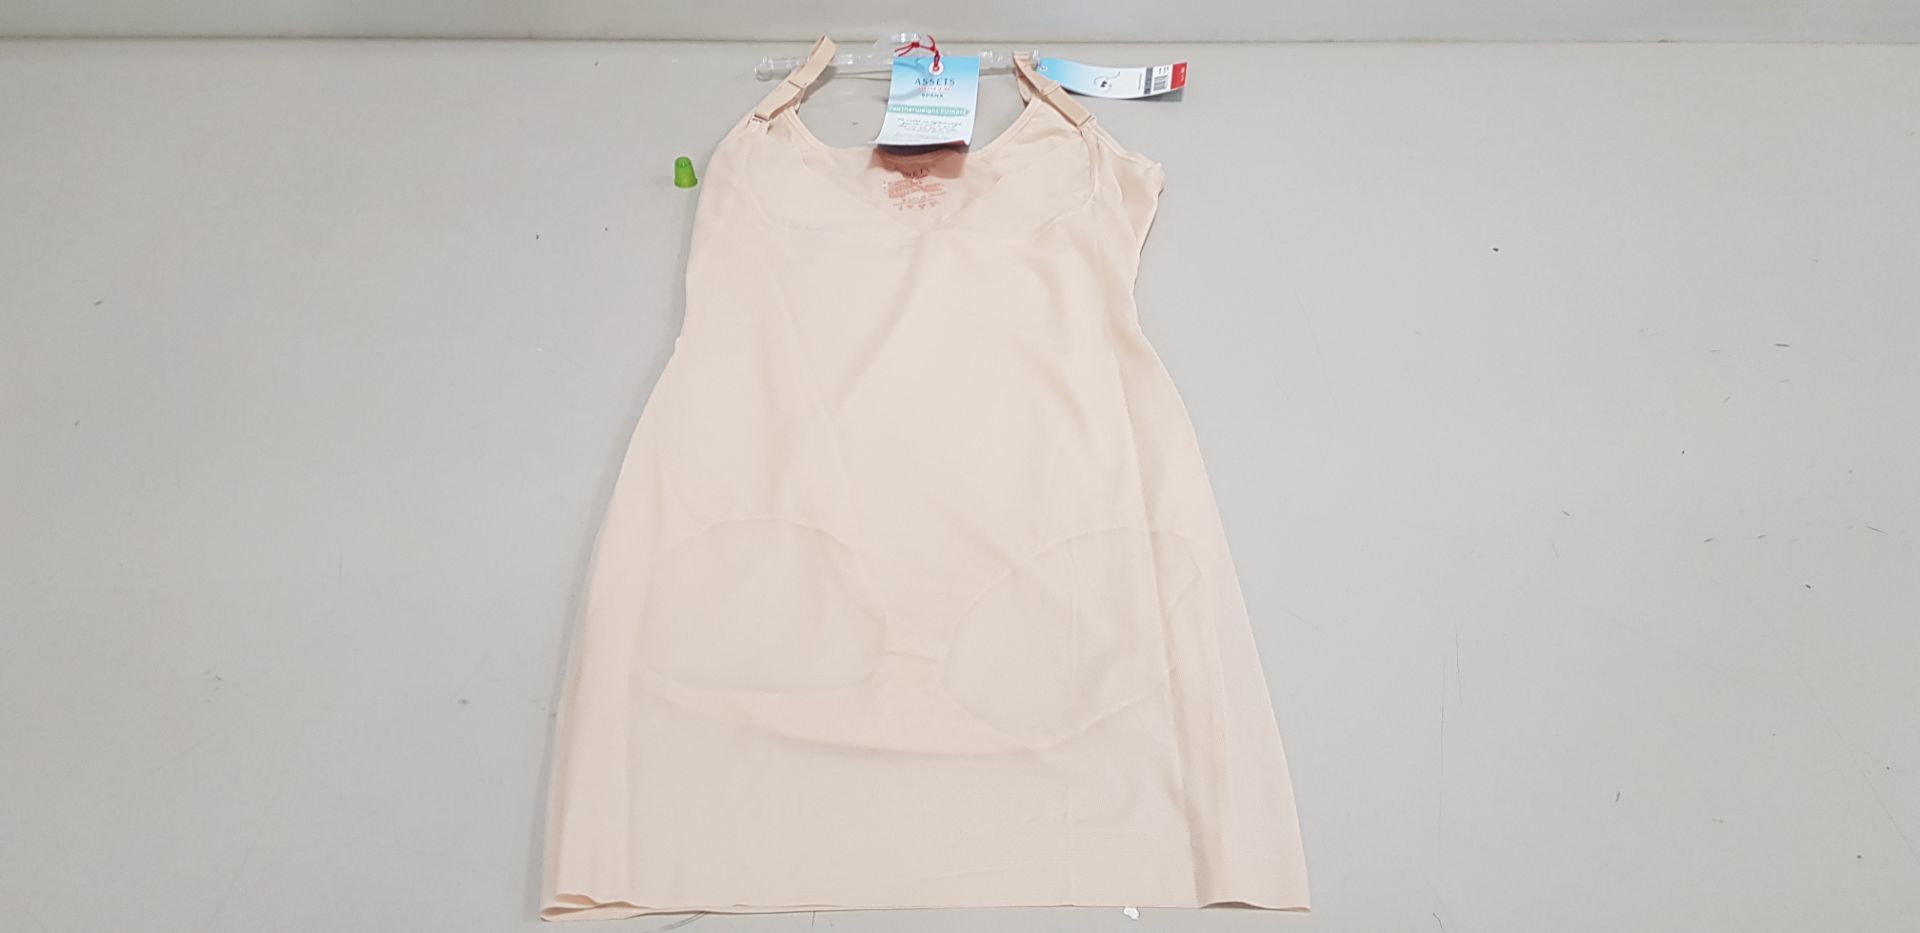 12 X BRAND NEW SPANX OPEN BUST BODY SLIP IN NUDE SIZE 1X RRP $60.00 (TOTAL RRP $720.00)